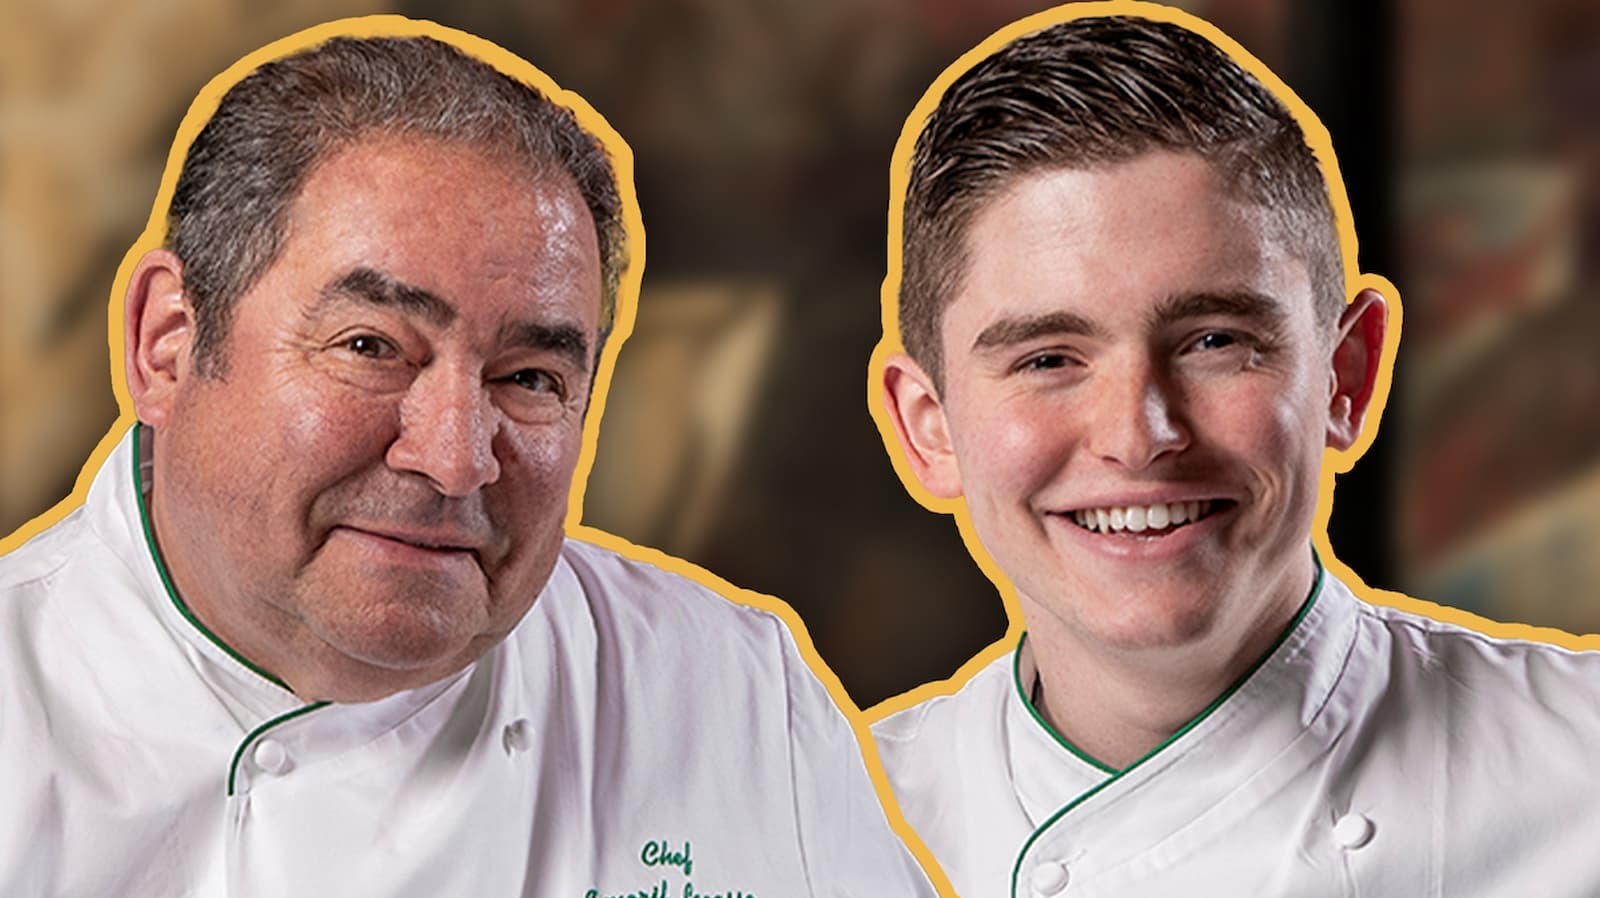 https://www.tastingtable.com/img/gallery/emeril-and-ej-lagasse-on-their-culinary-legacy-as-father-and-son-shared-tastes/l-intro-1690827264.jpg